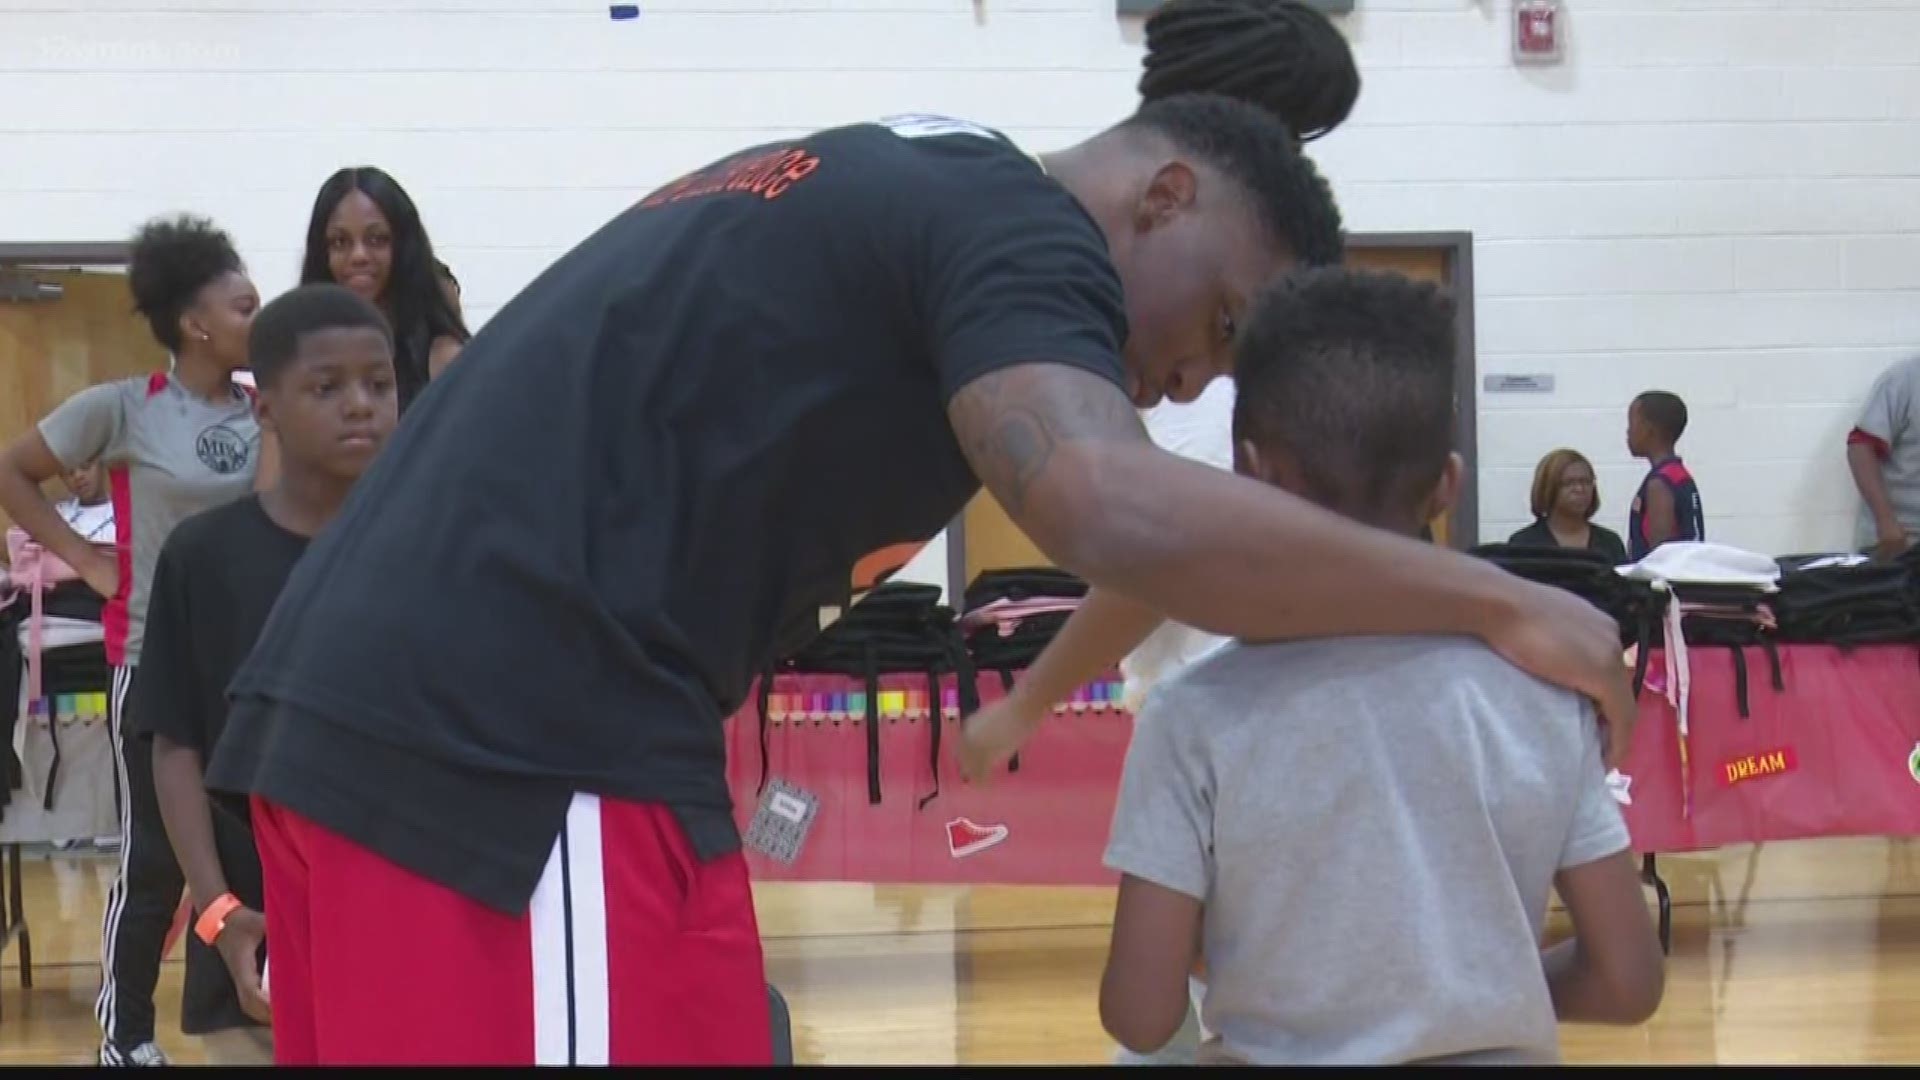 Twiggs County native and NFL star Darqueze Dennard held his first Nike backpack giveaway at Rosa Jackson Center in Macon. More than 200 students lined up for a chance to win prizes and see the NFL star.